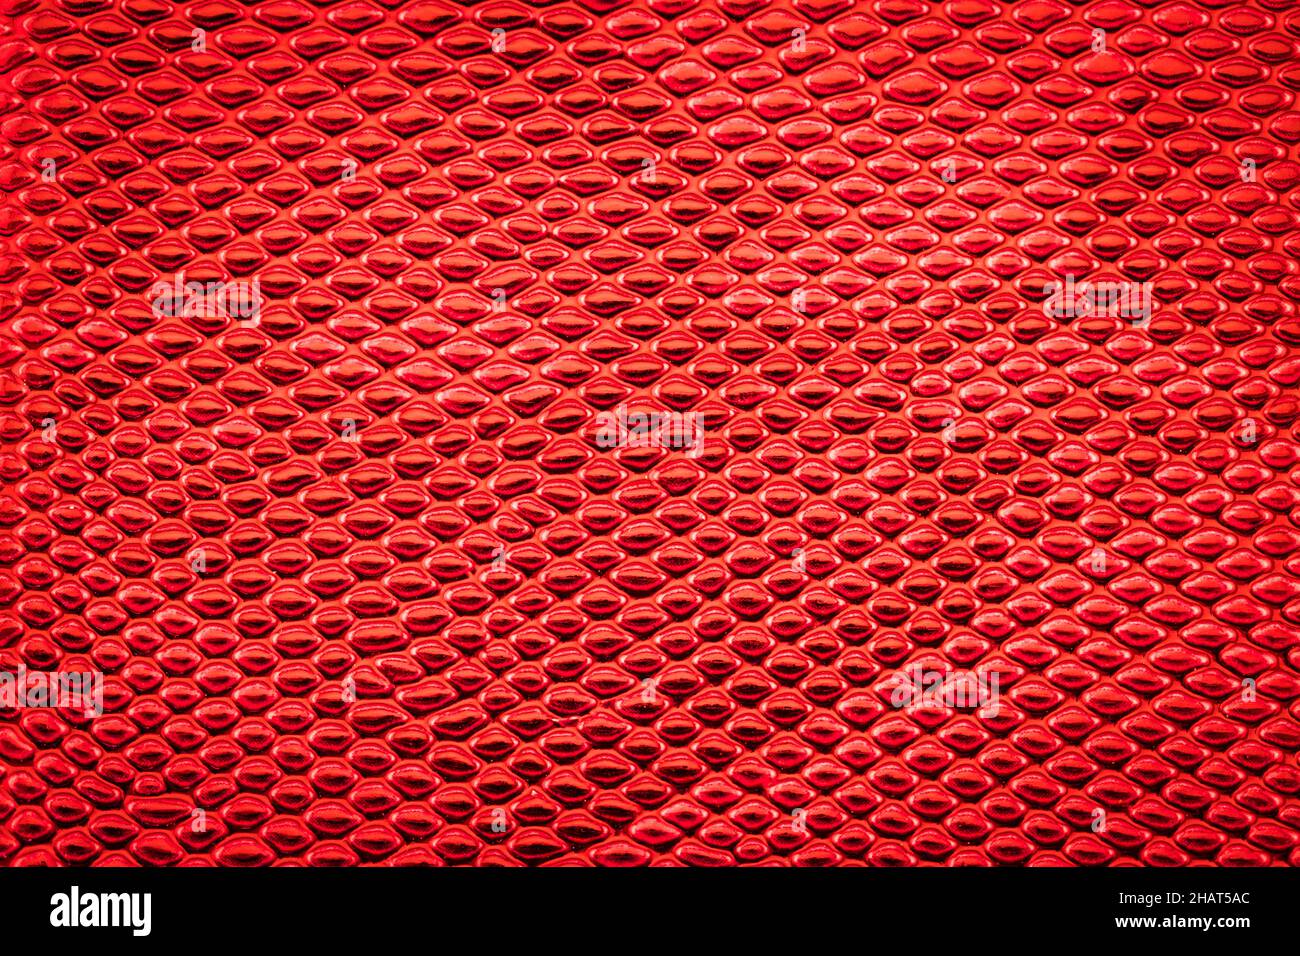 Red exotic Snake skin pattern as a wallpaper Stock Photo